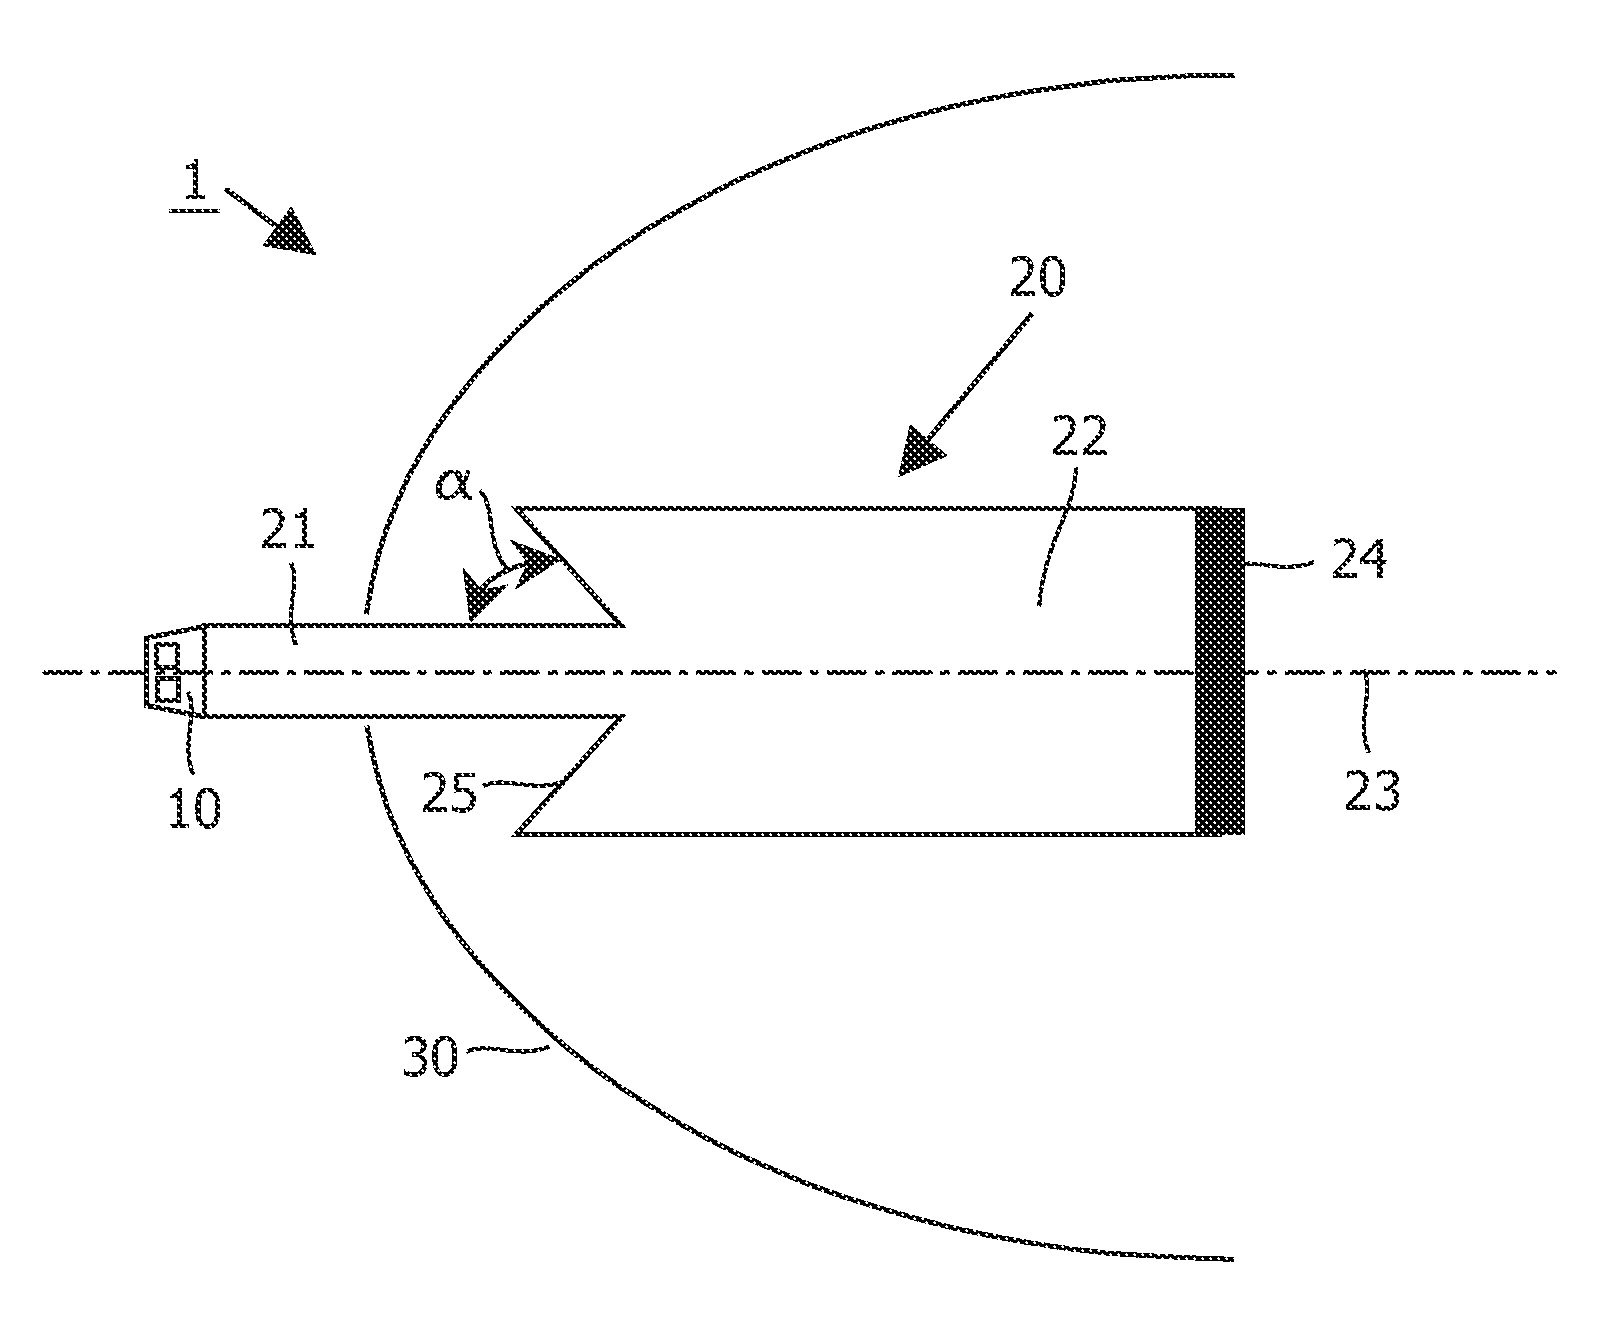 Illumination device comprising a light source and a light-guide